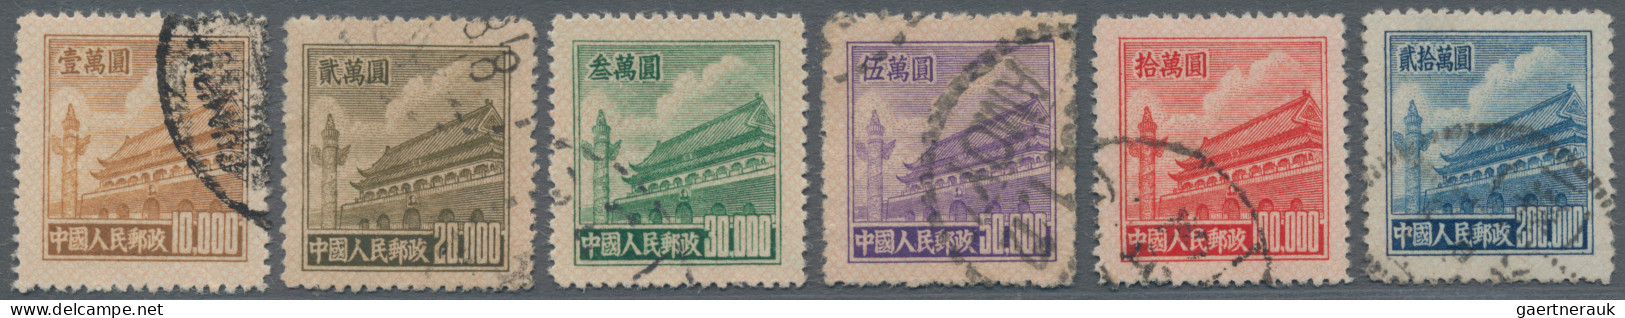 China (PRC): 1951, Tien An Men 5th Issue Set (R5), Used, $200.000 Slight Corner - Used Stamps